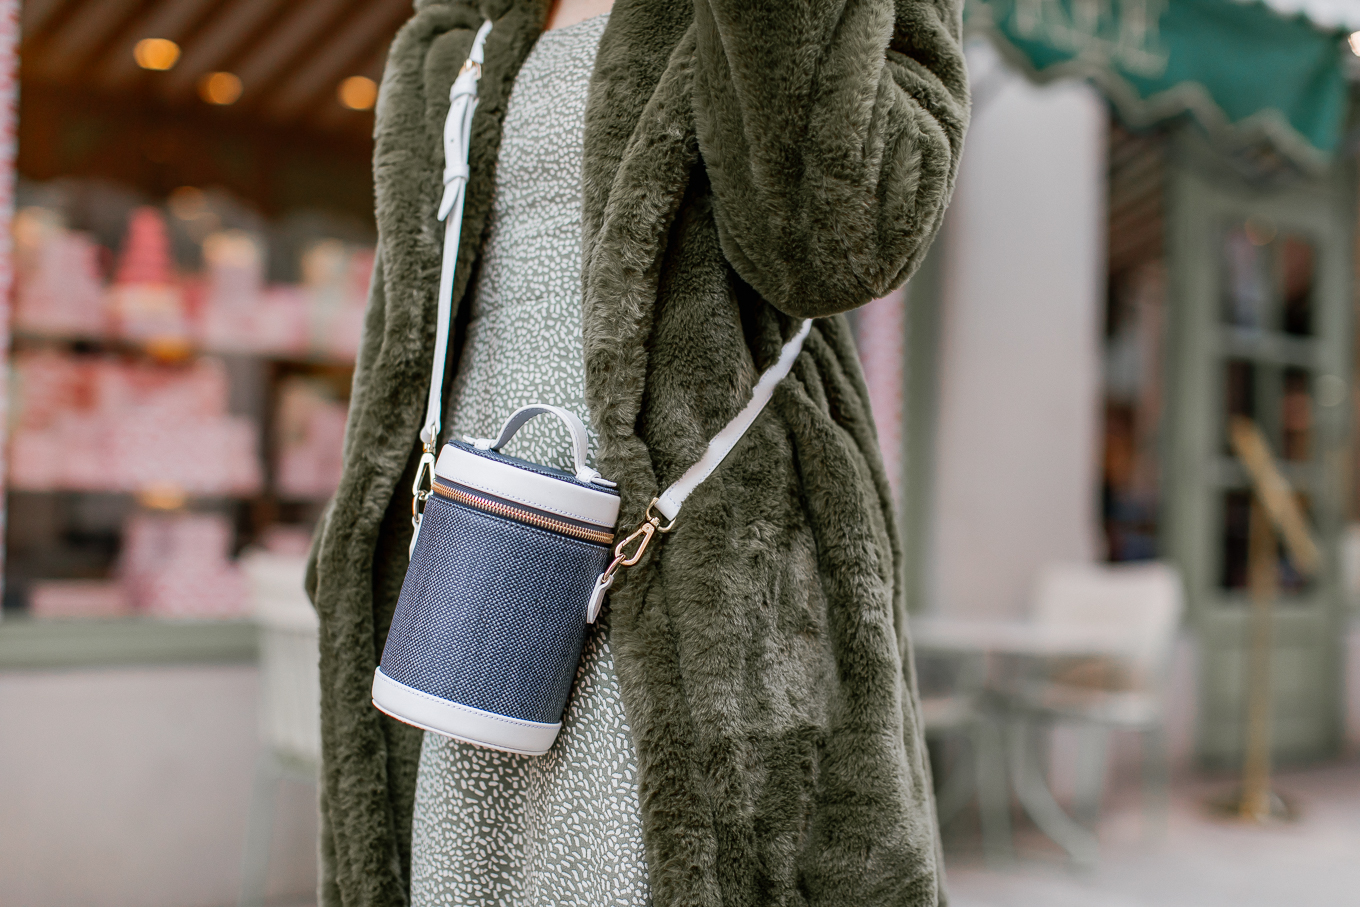 Paravel Capsule Bag, Navy and White Bag | Louella Reese